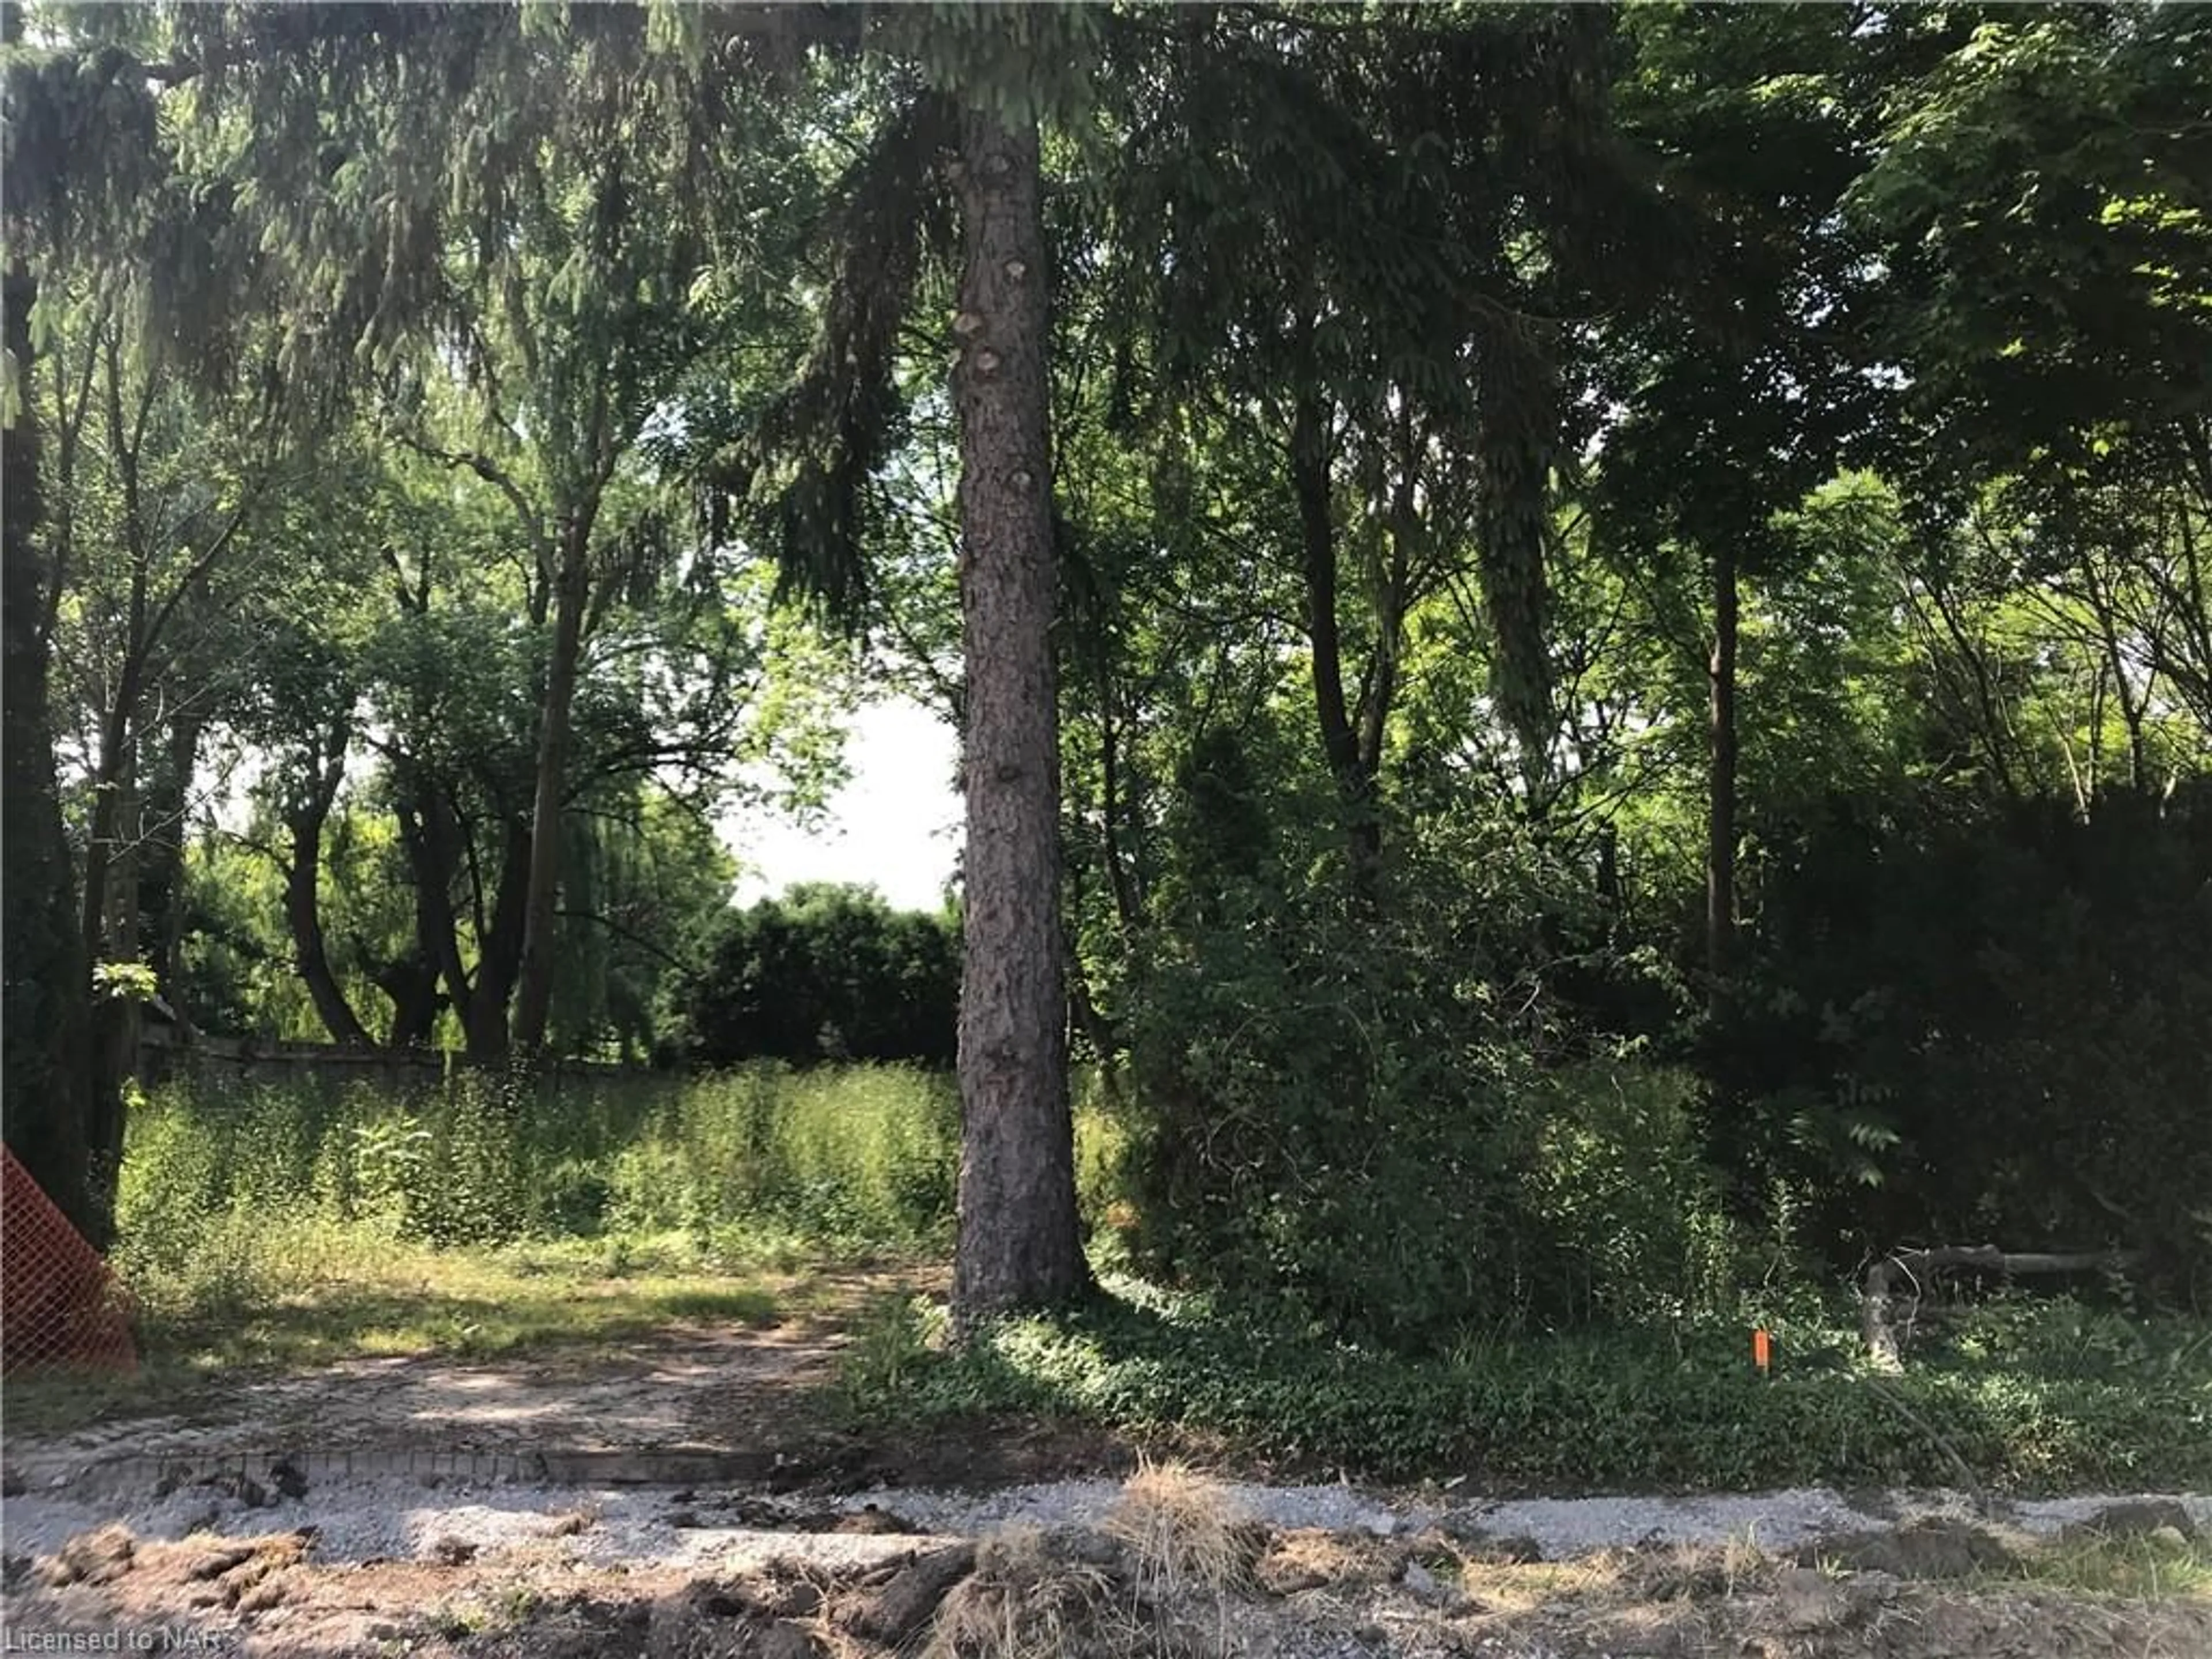 Forest view for 515 Gate St, Niagara-on-the-Lake Ontario L0S 1J0